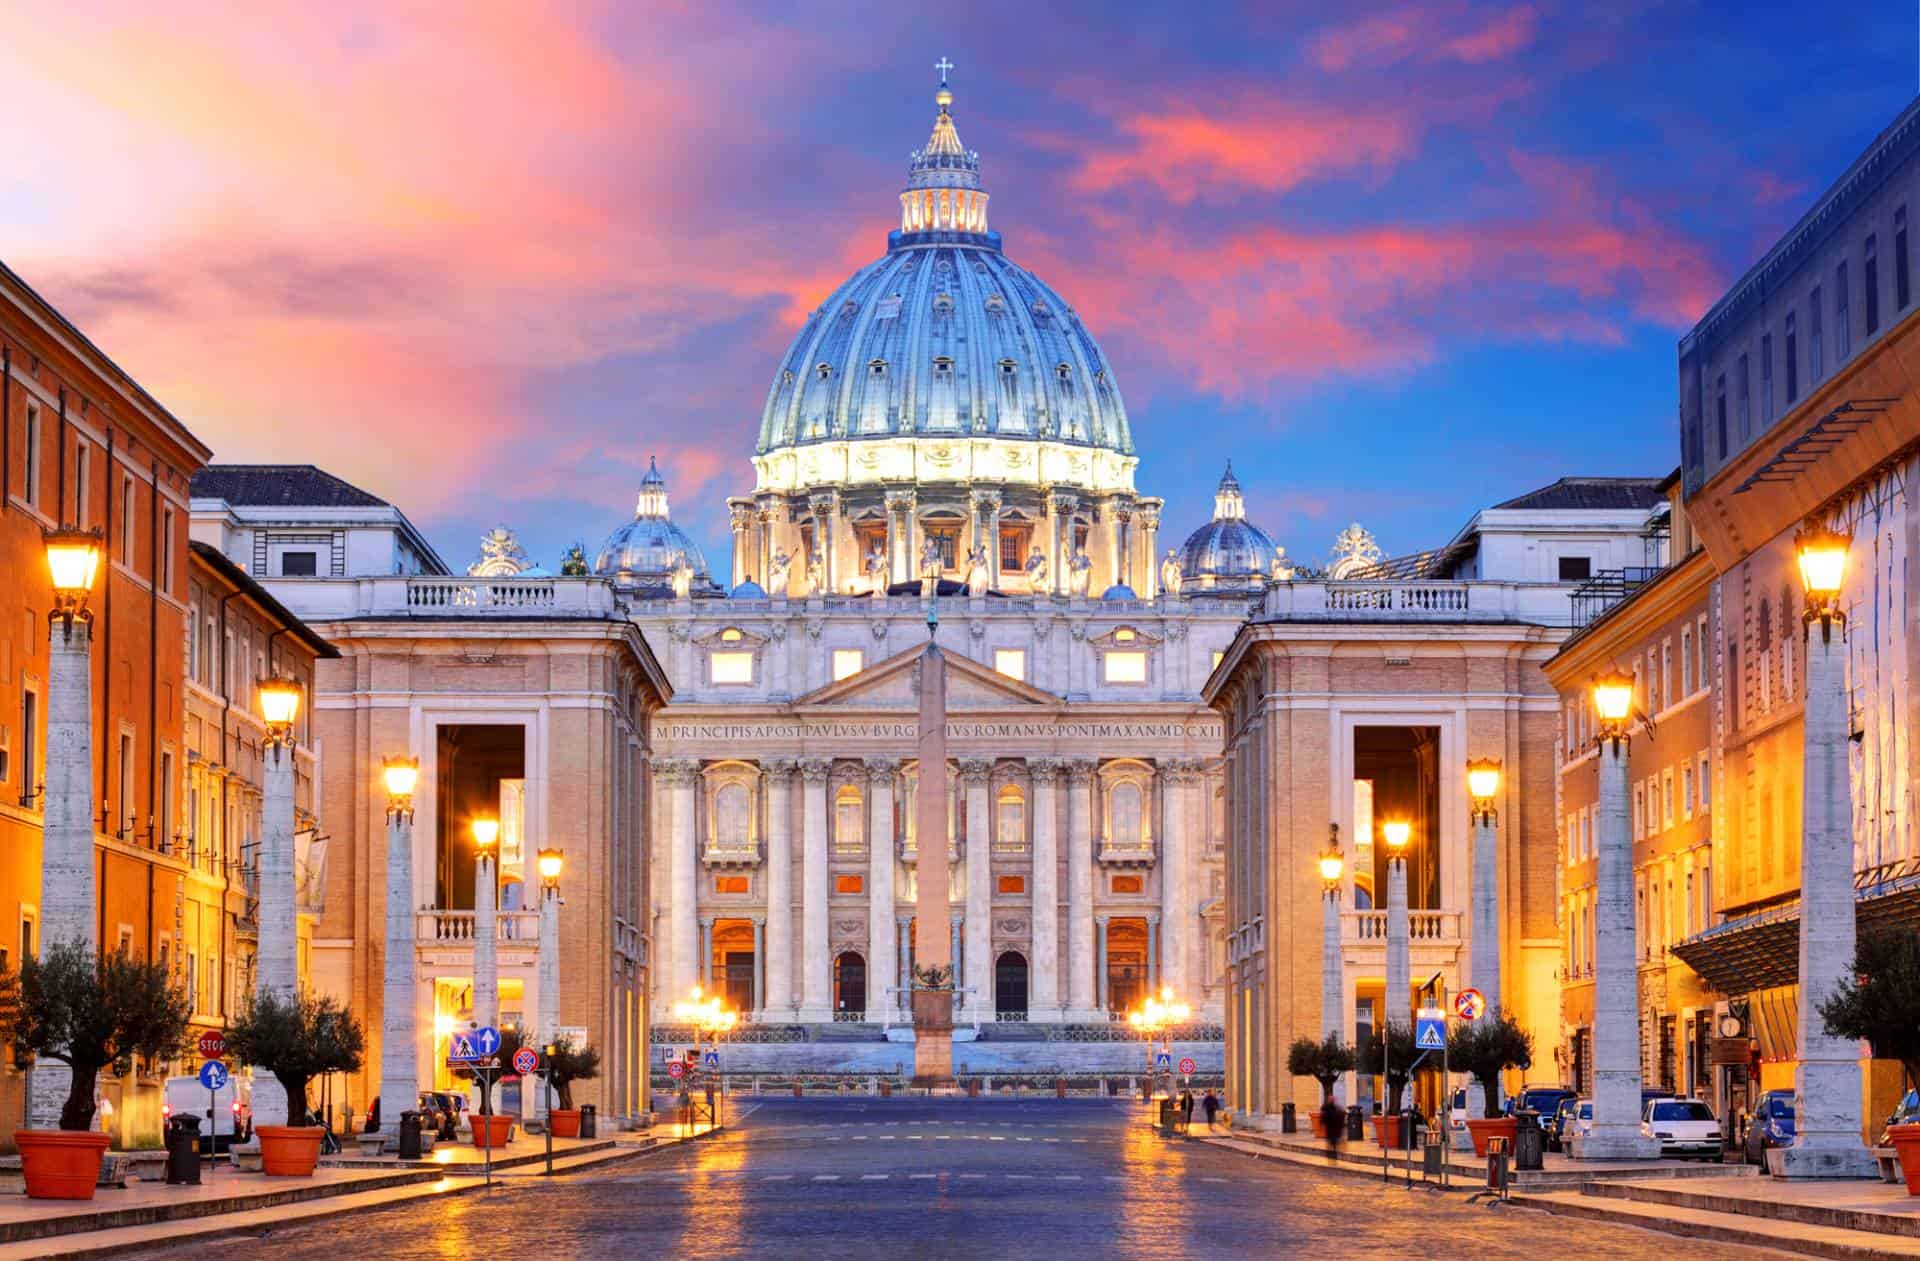 St. Peter’s Basilica at the Vatican during sunset.